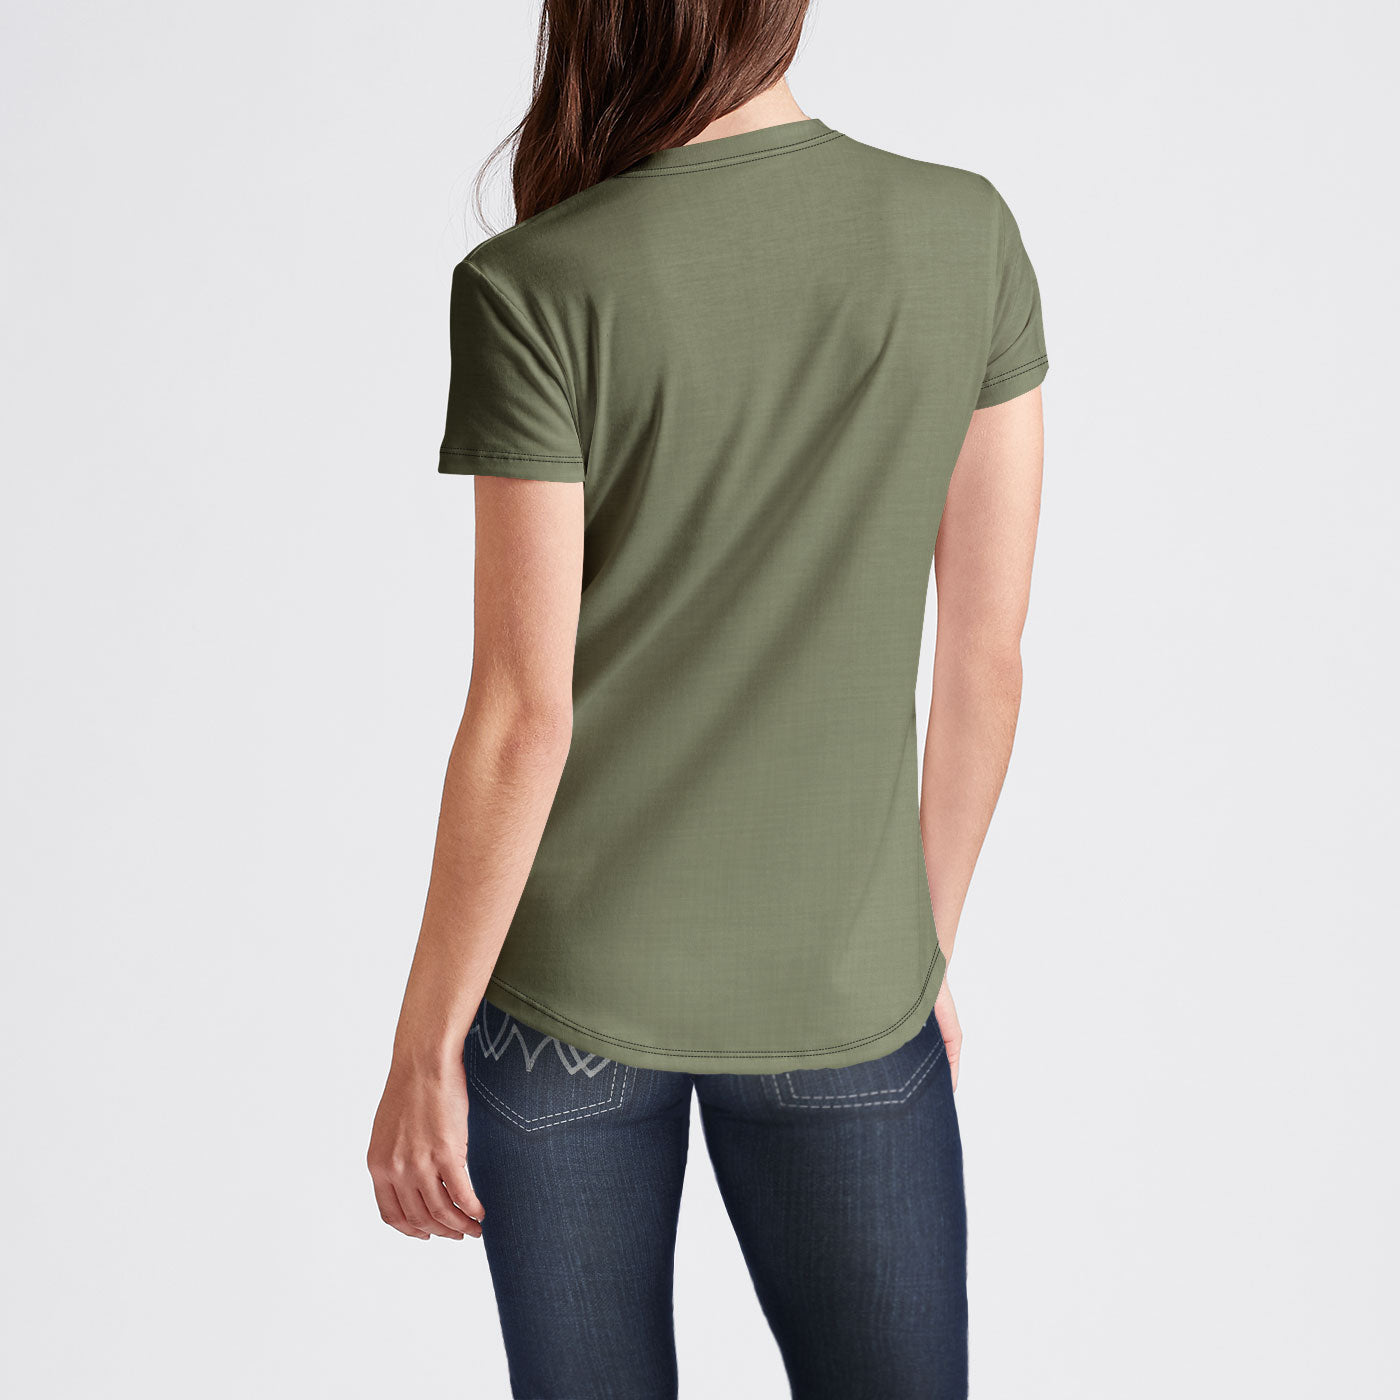 Queen of Aces Green Womens Tshirt